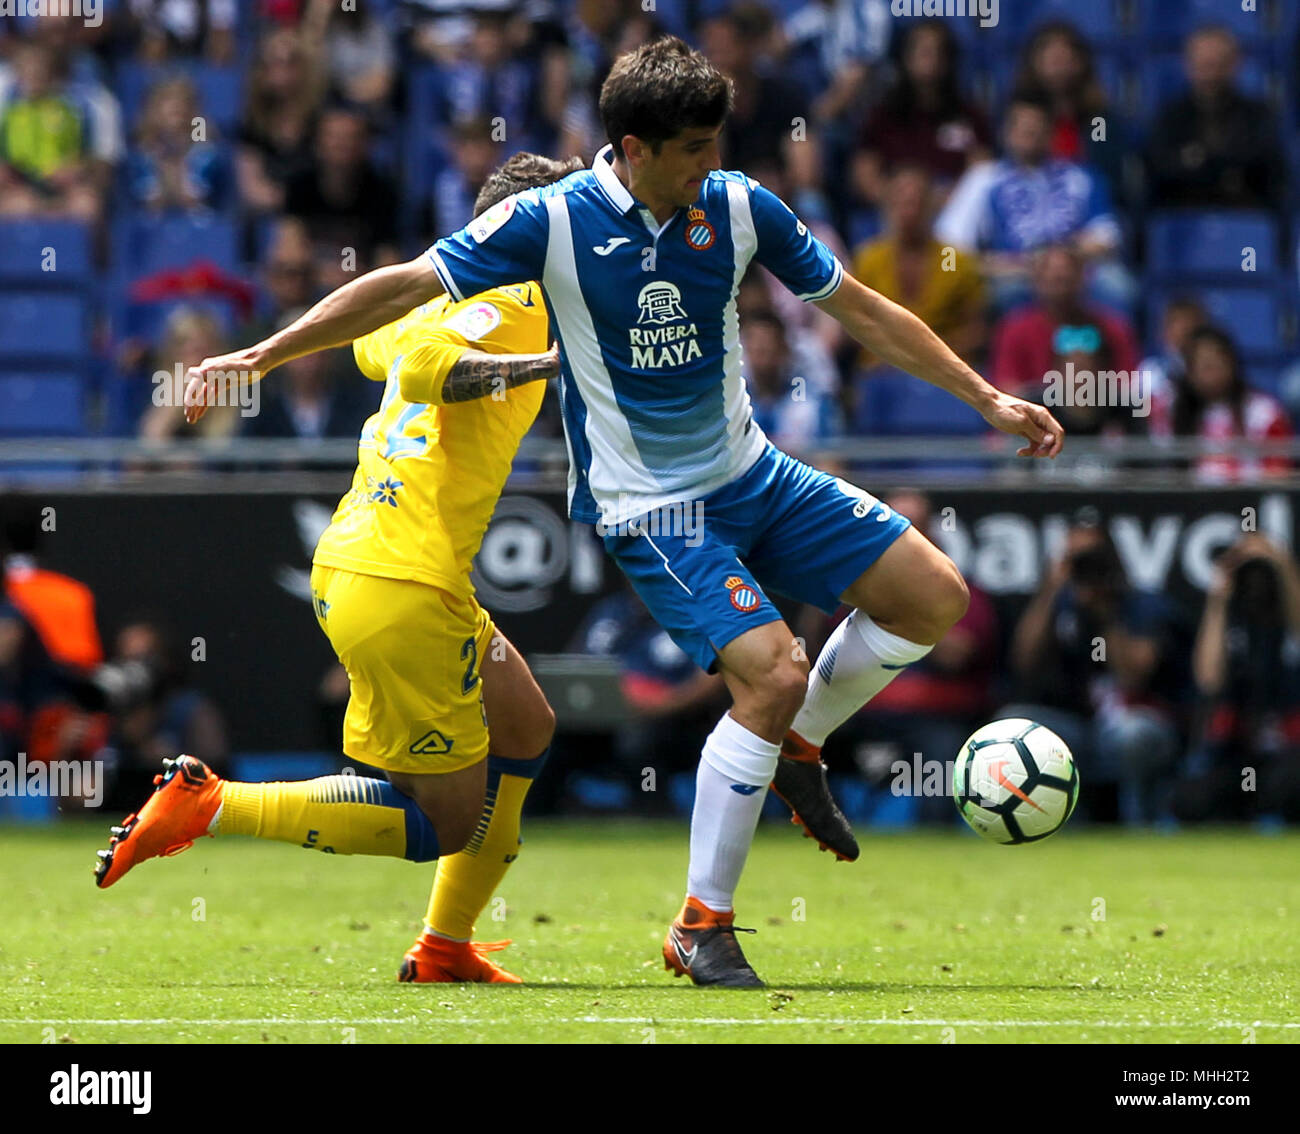 Rcd espanyol hi-res stock photography and images - Alamy